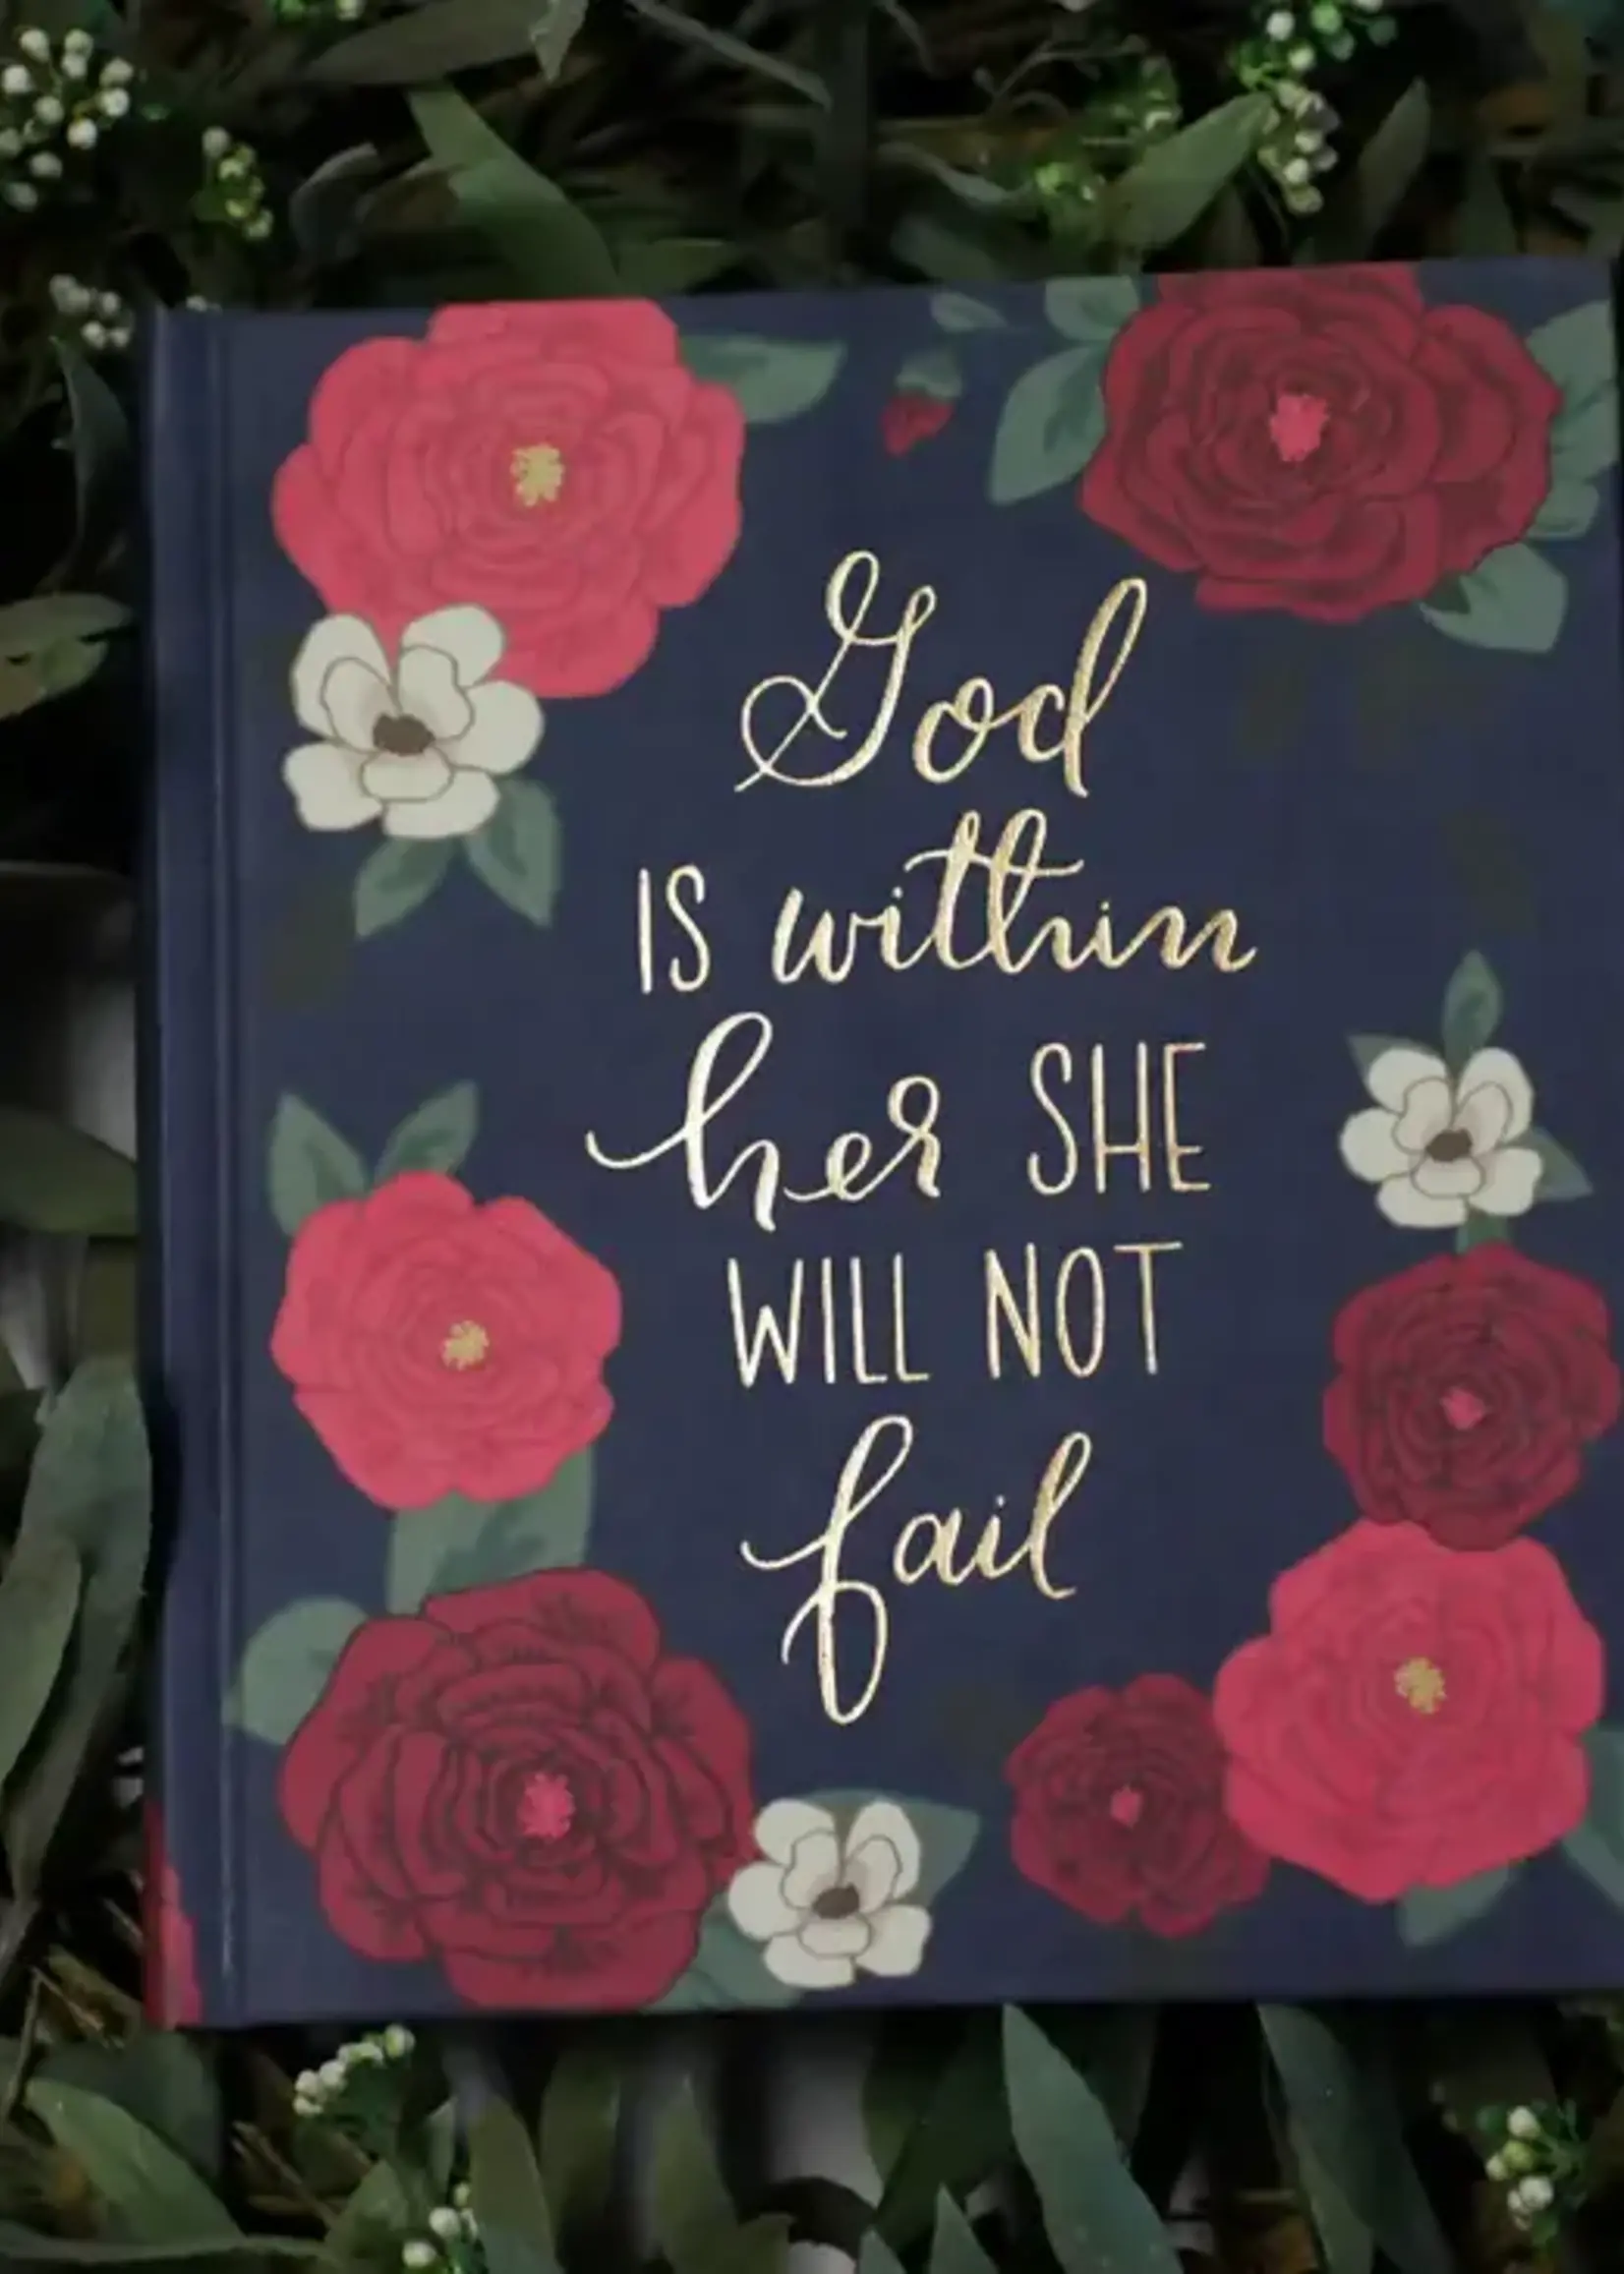 WHEAT & HONEY CO GOD IS WITHIN HER JOURNALING BIBLE